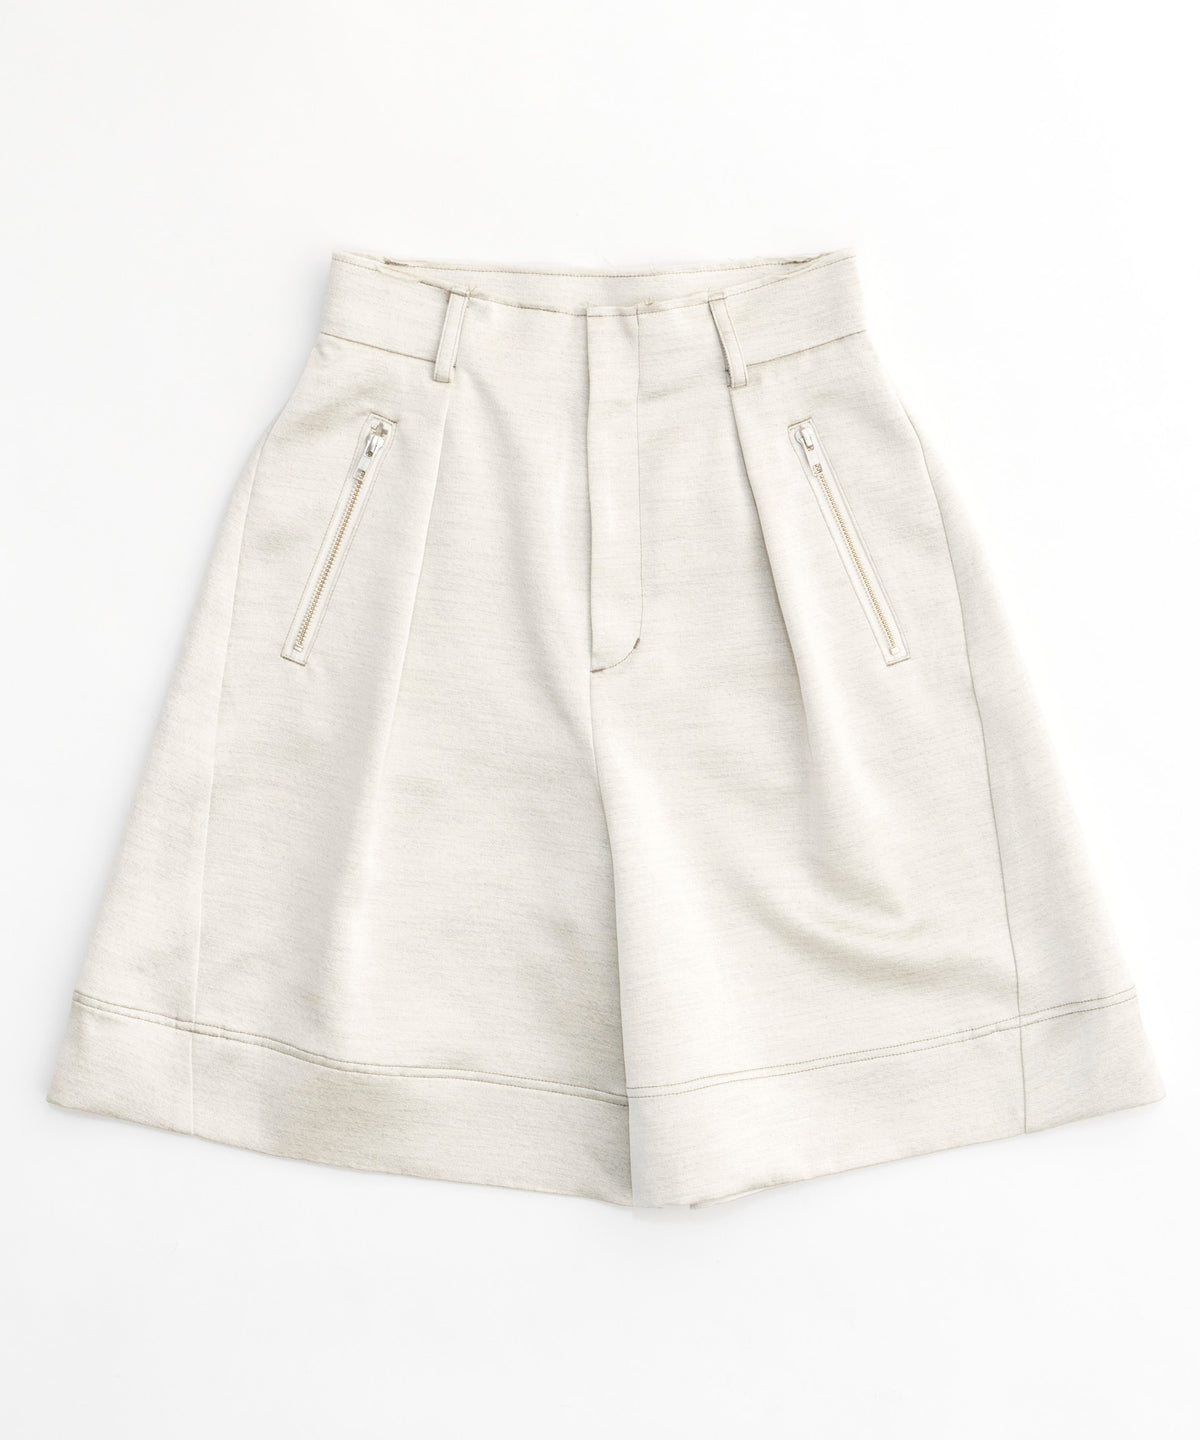 Wide Silhouette Shorts